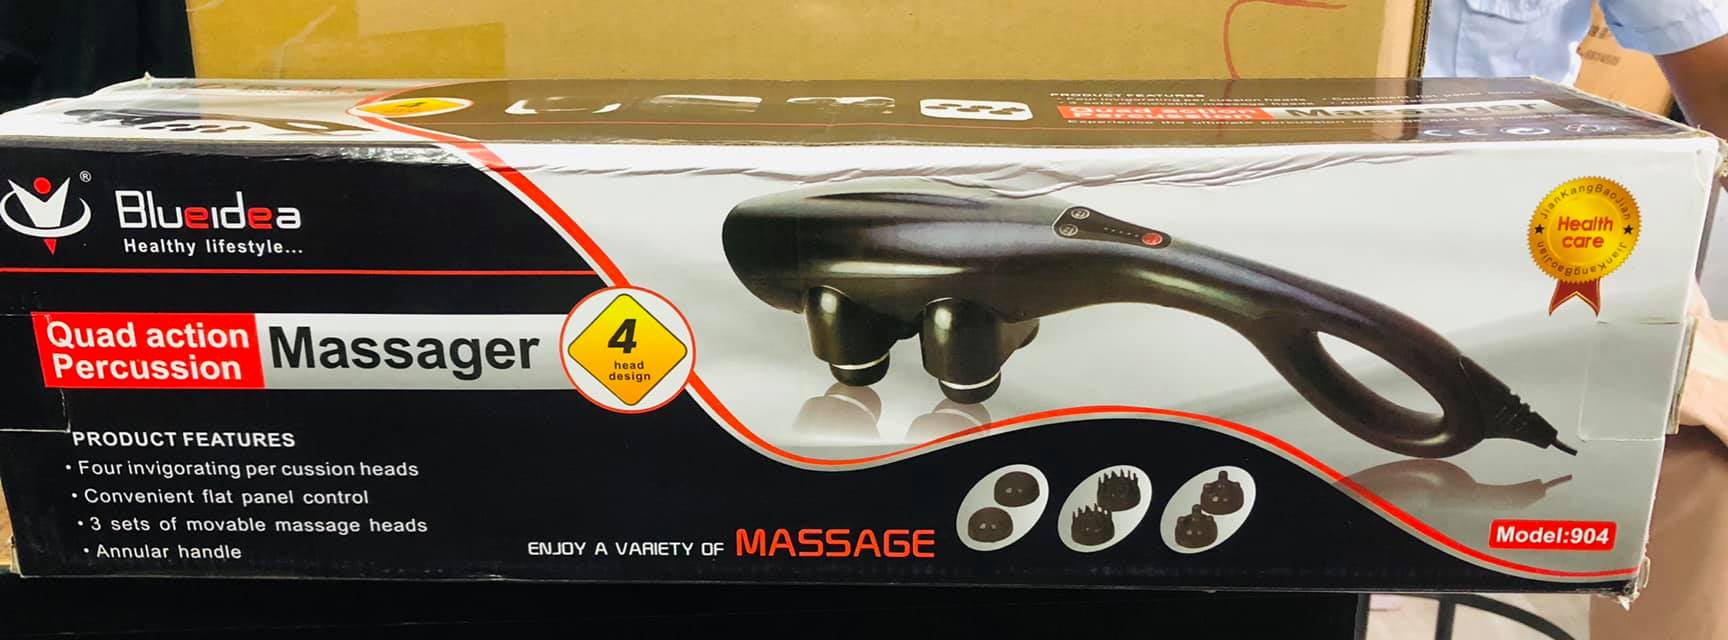 Electric Quad Action Percussion Therapeutic Full Body Massager Machine